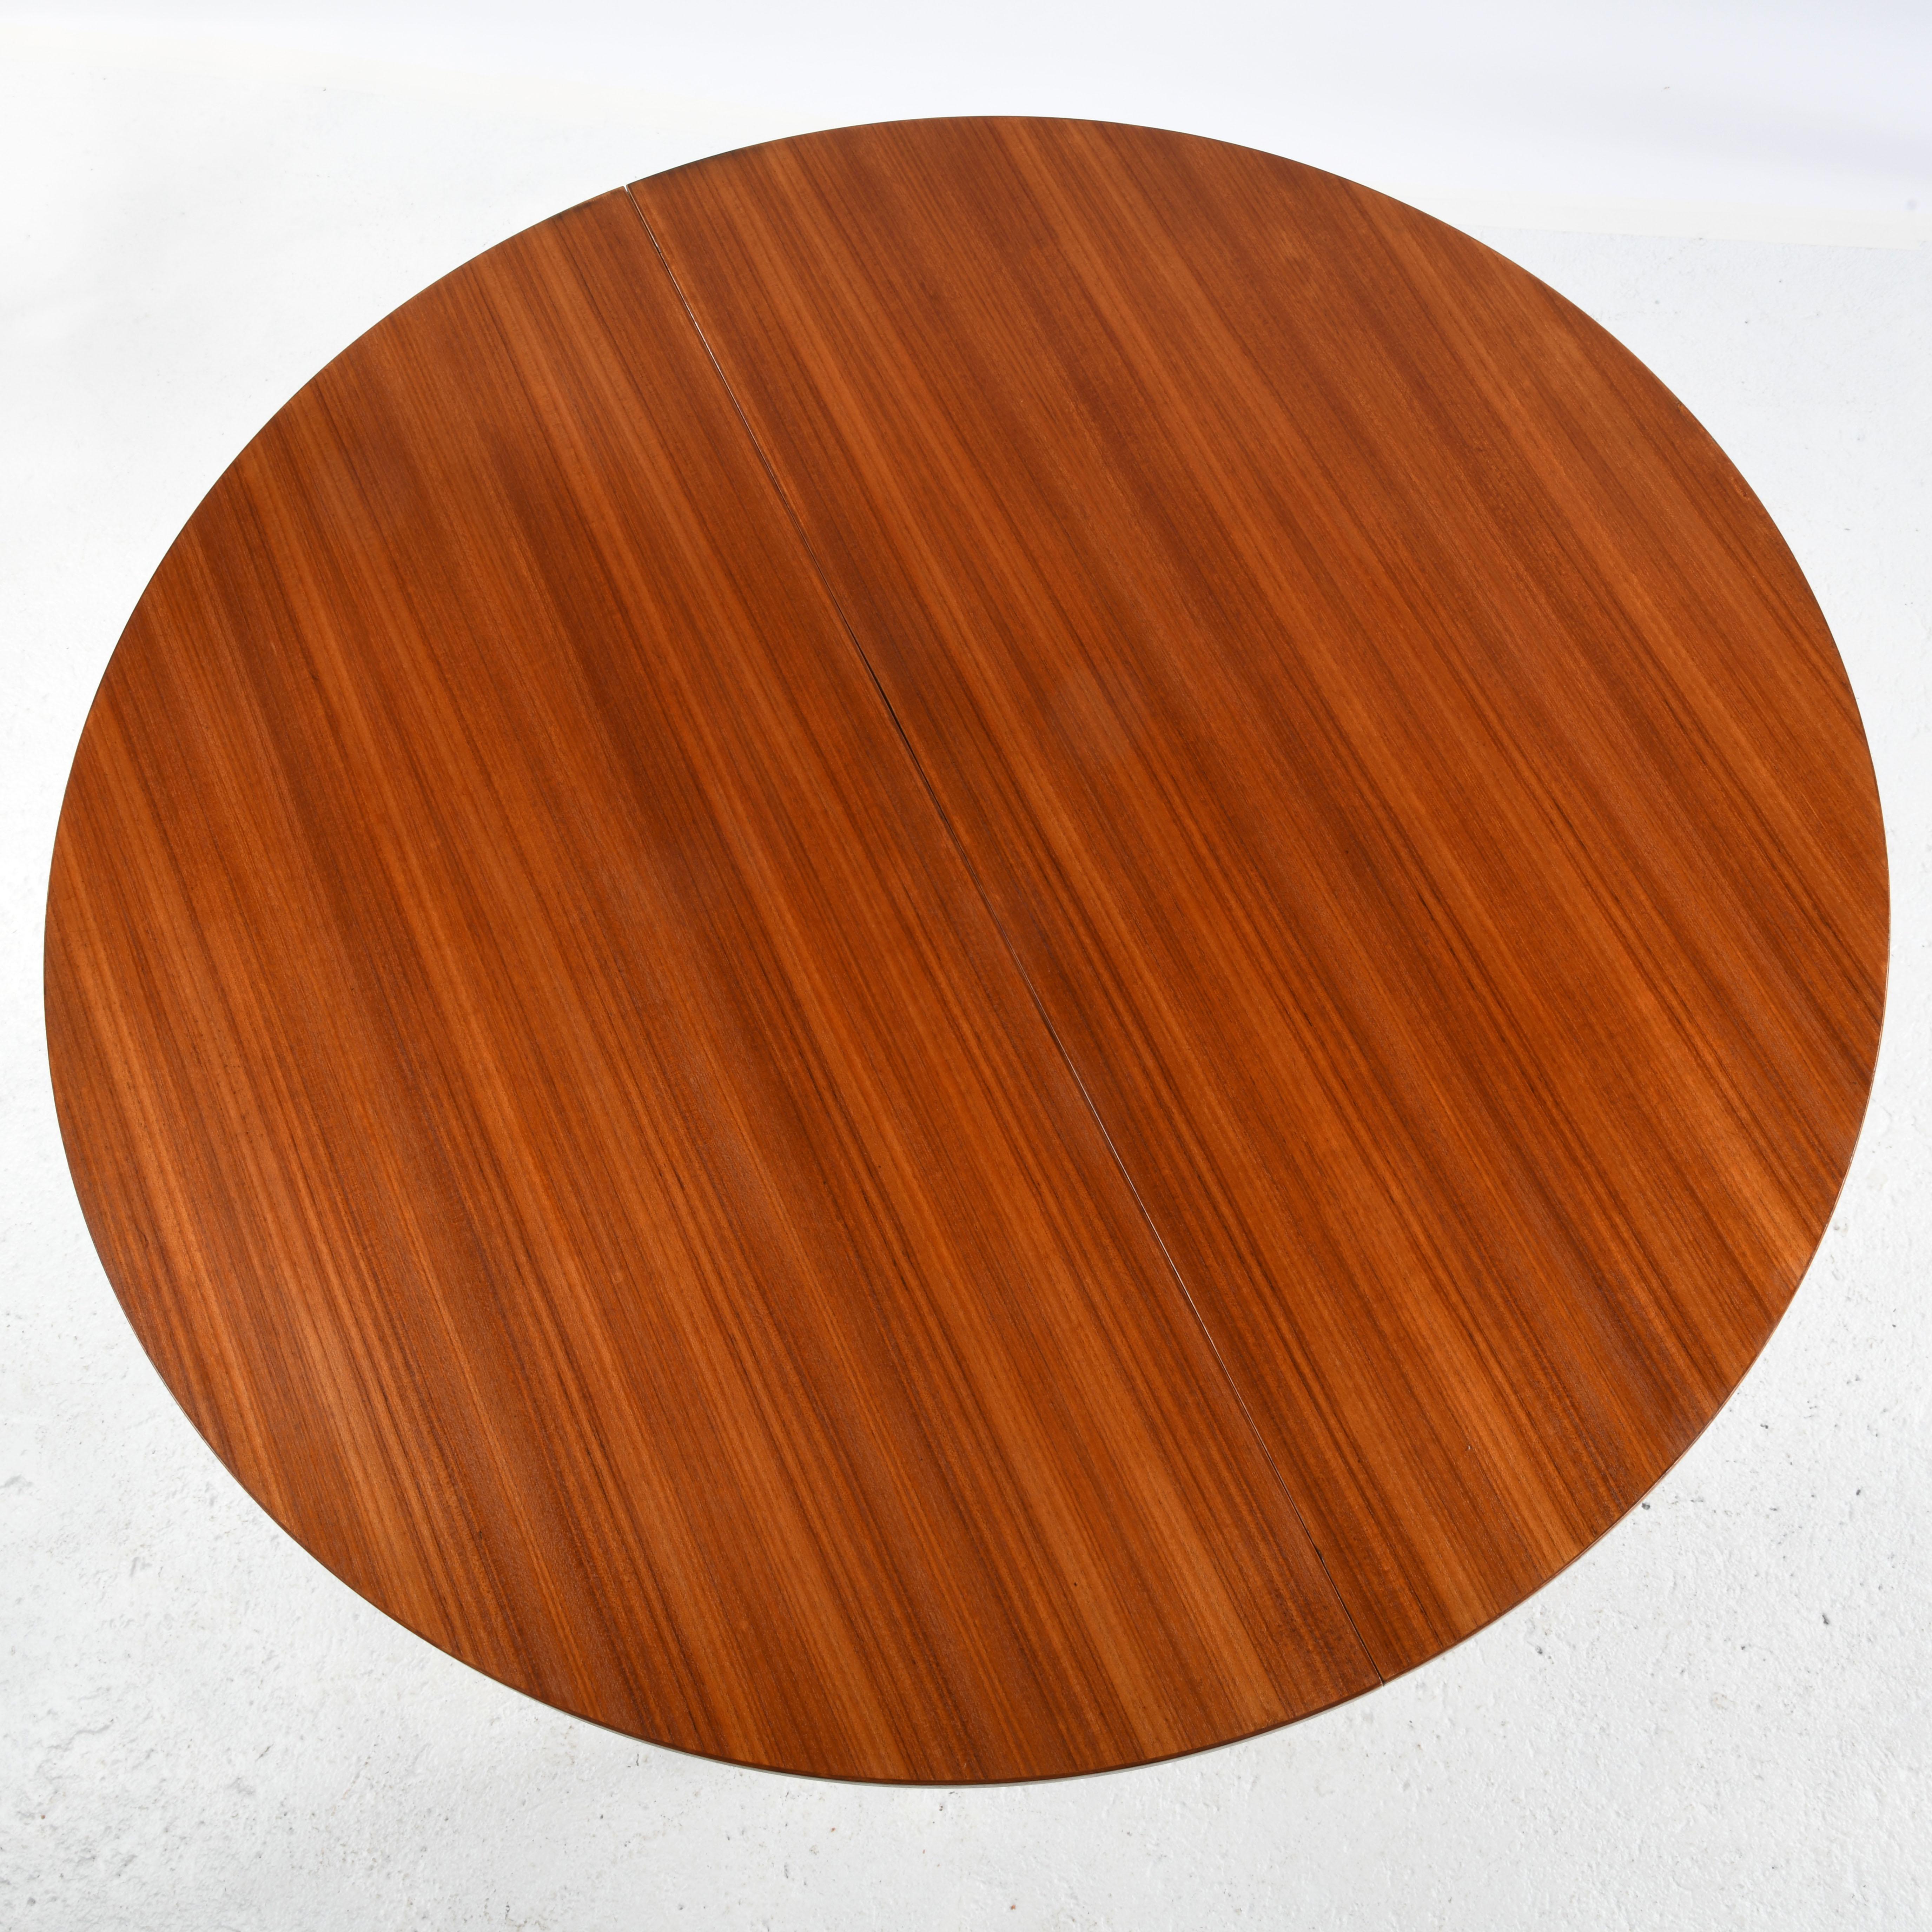 Mid-20th Century Scandinavian vintage teak extensible table, round and oval